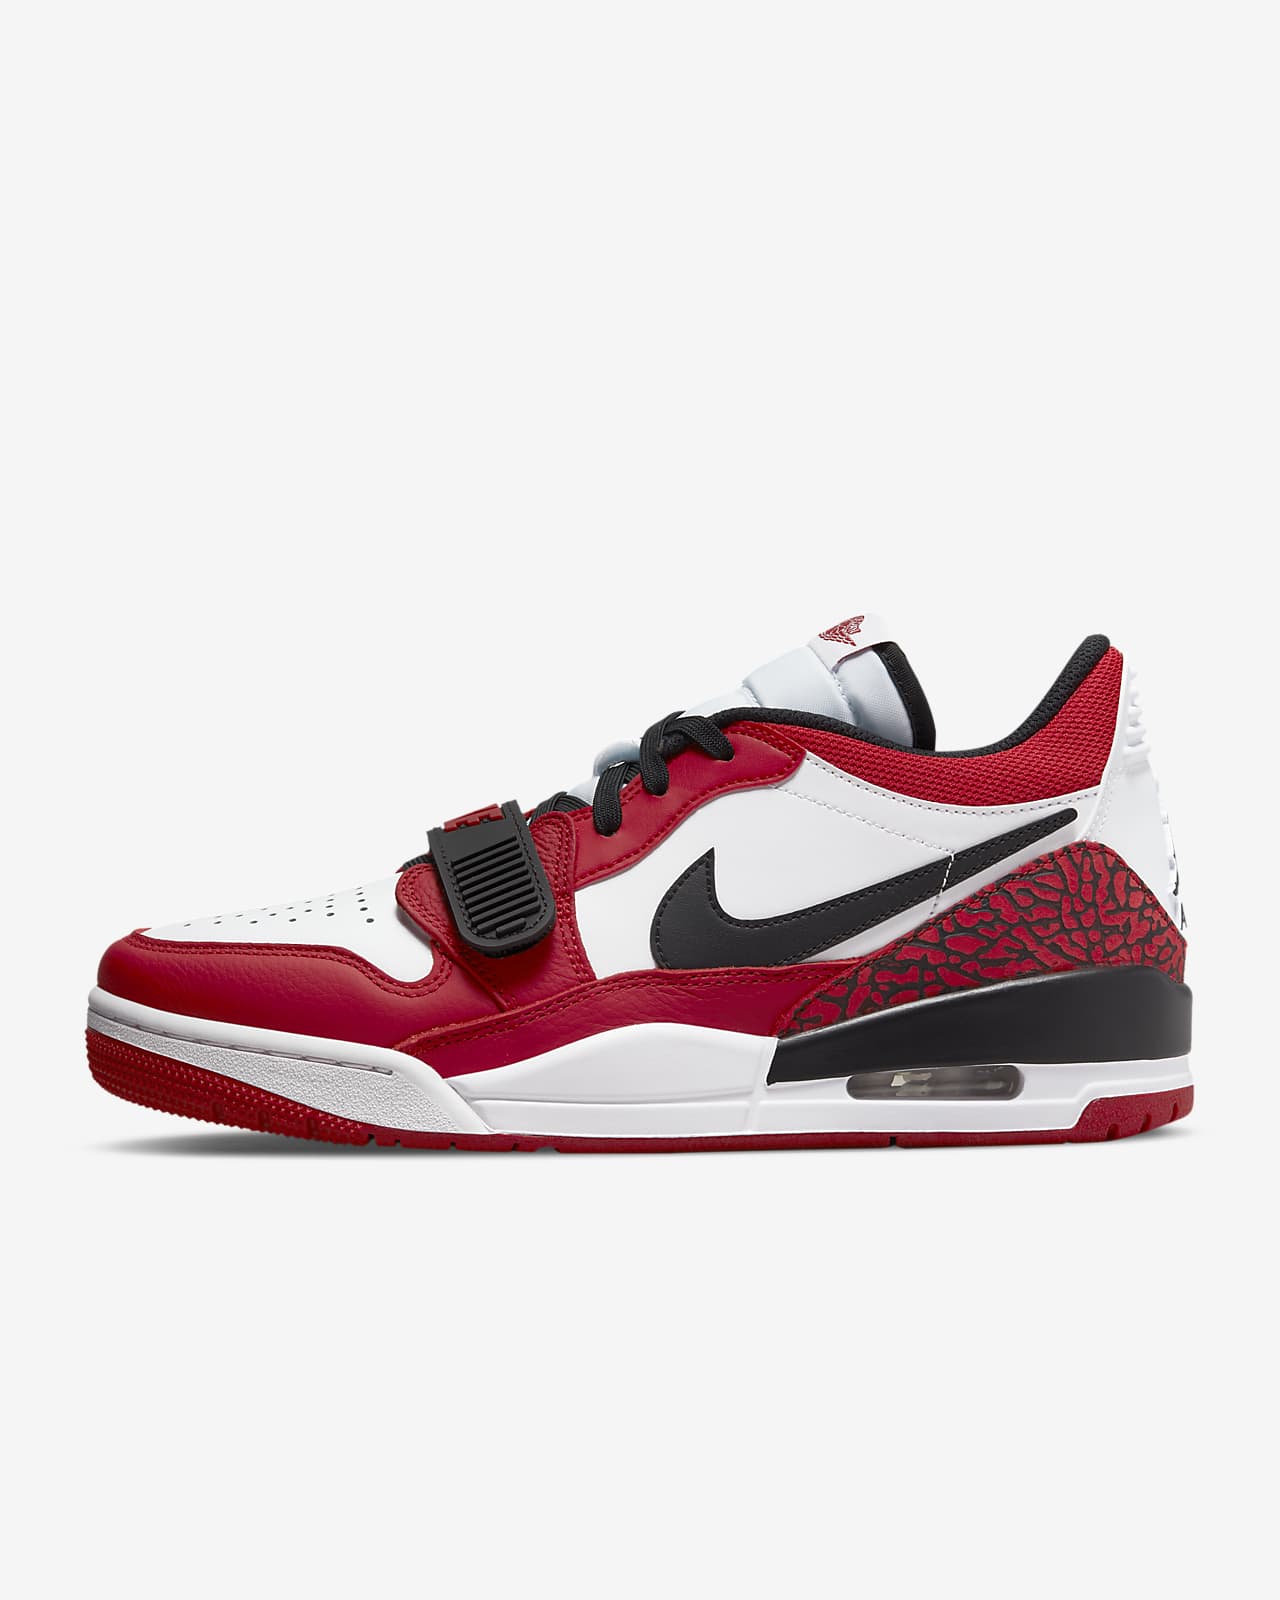 Take out Confidential Incompetence Air Jordan Legacy 312 Low Men's Shoes. Nike ID